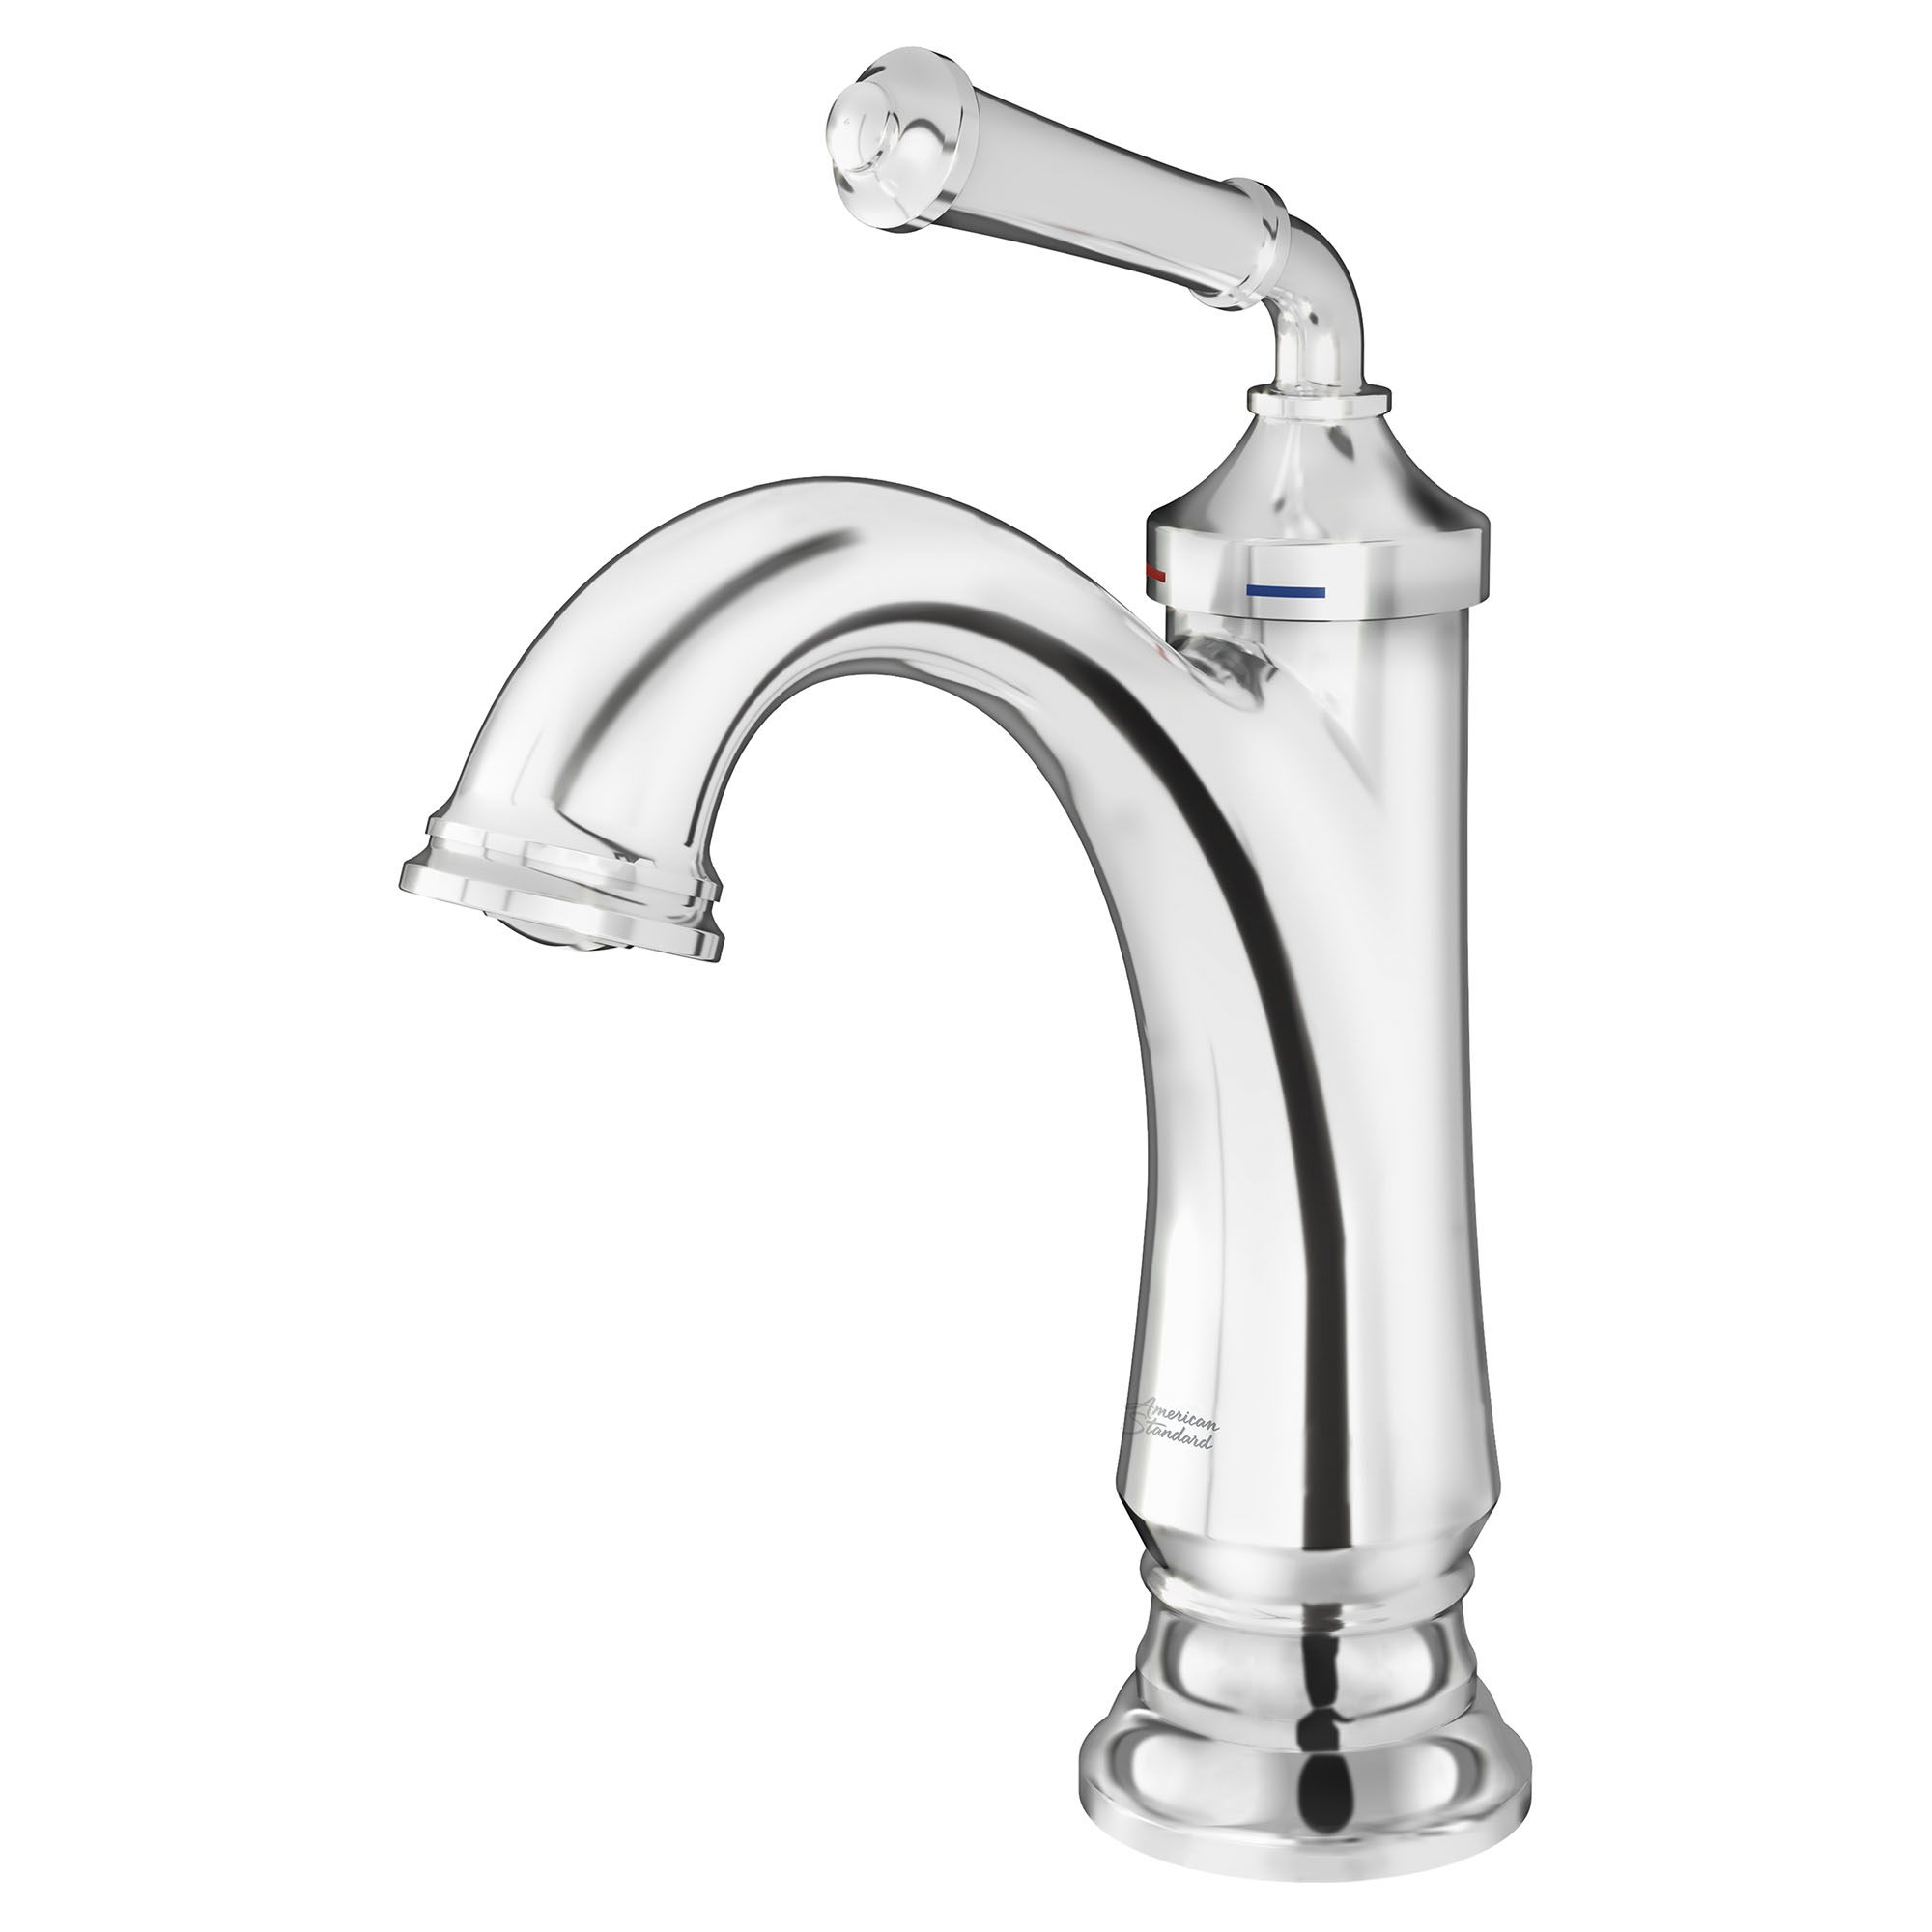 Delancey™ Single Hole Single-Handle Bathroom Faucet 1.2 gpm/4.5 L/min With Lever Handle